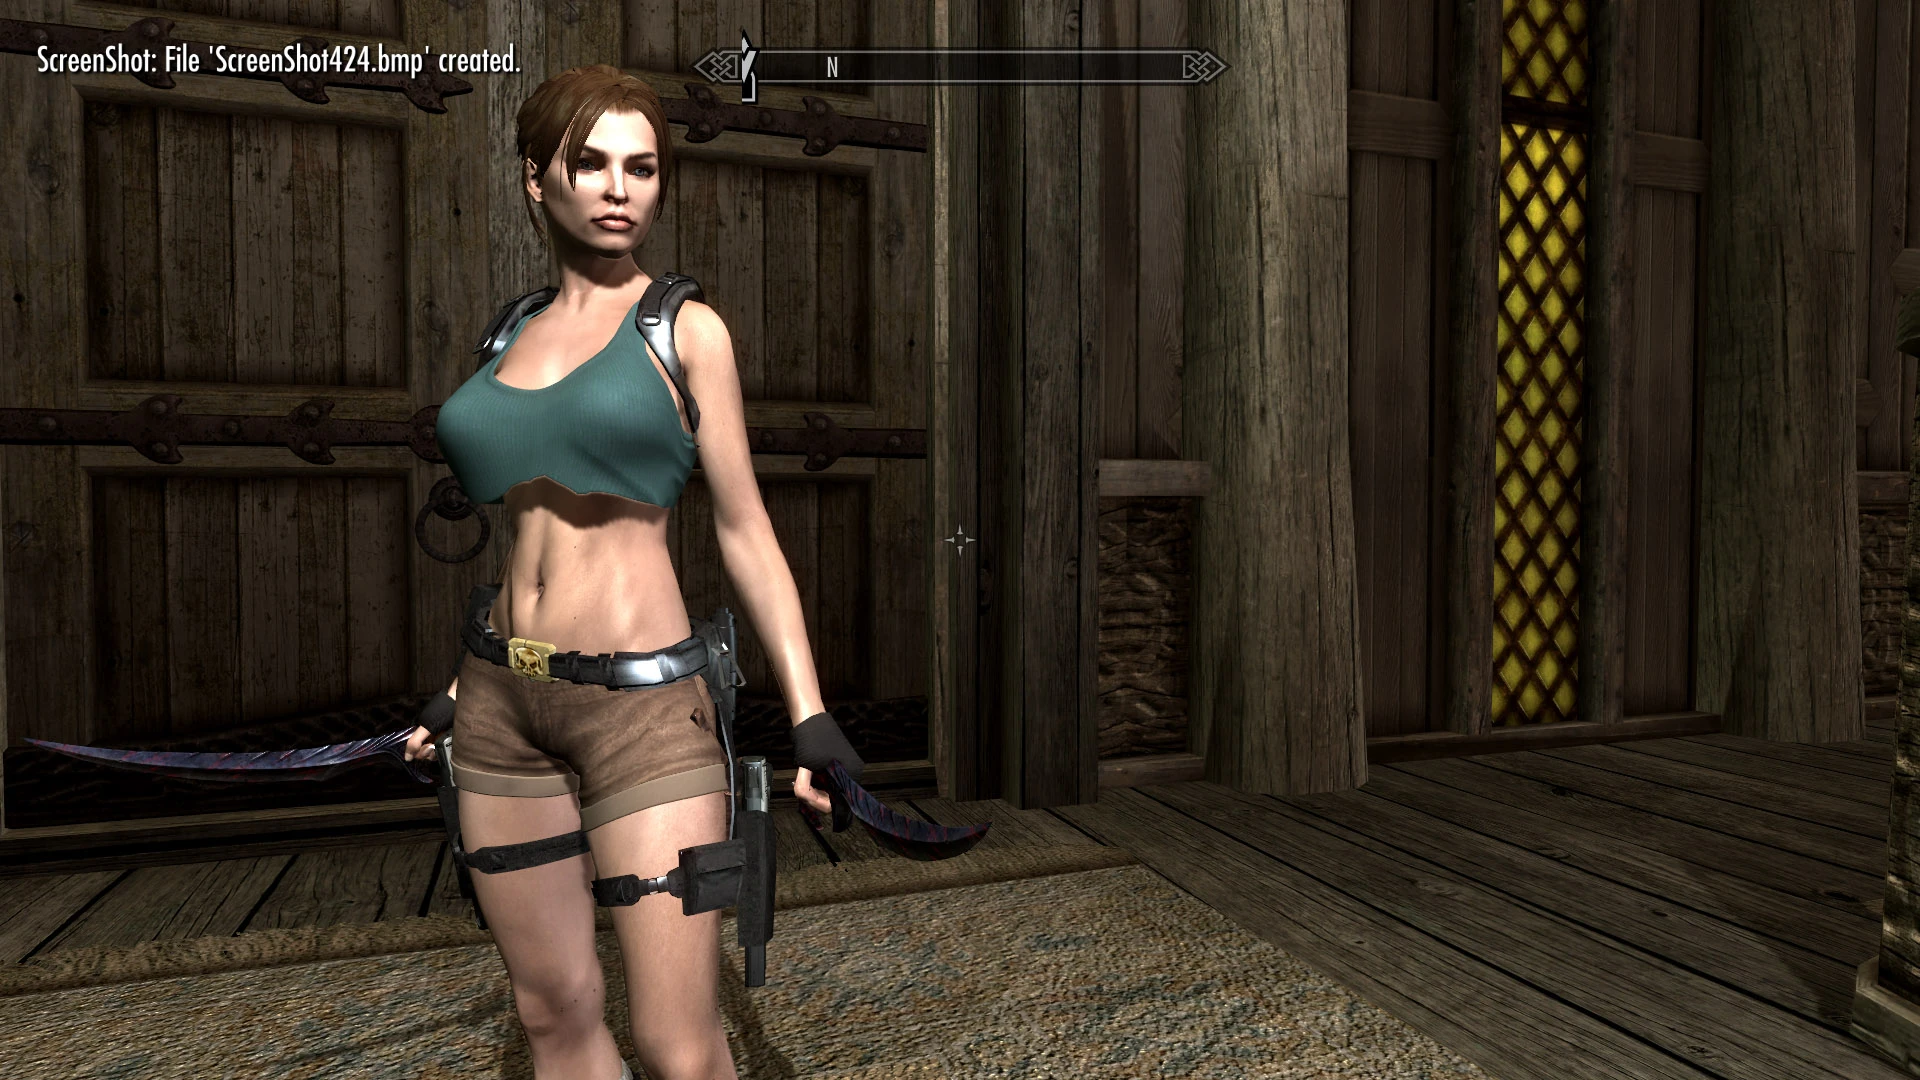 Tomb raider 2013 nude outfit mod sex vids